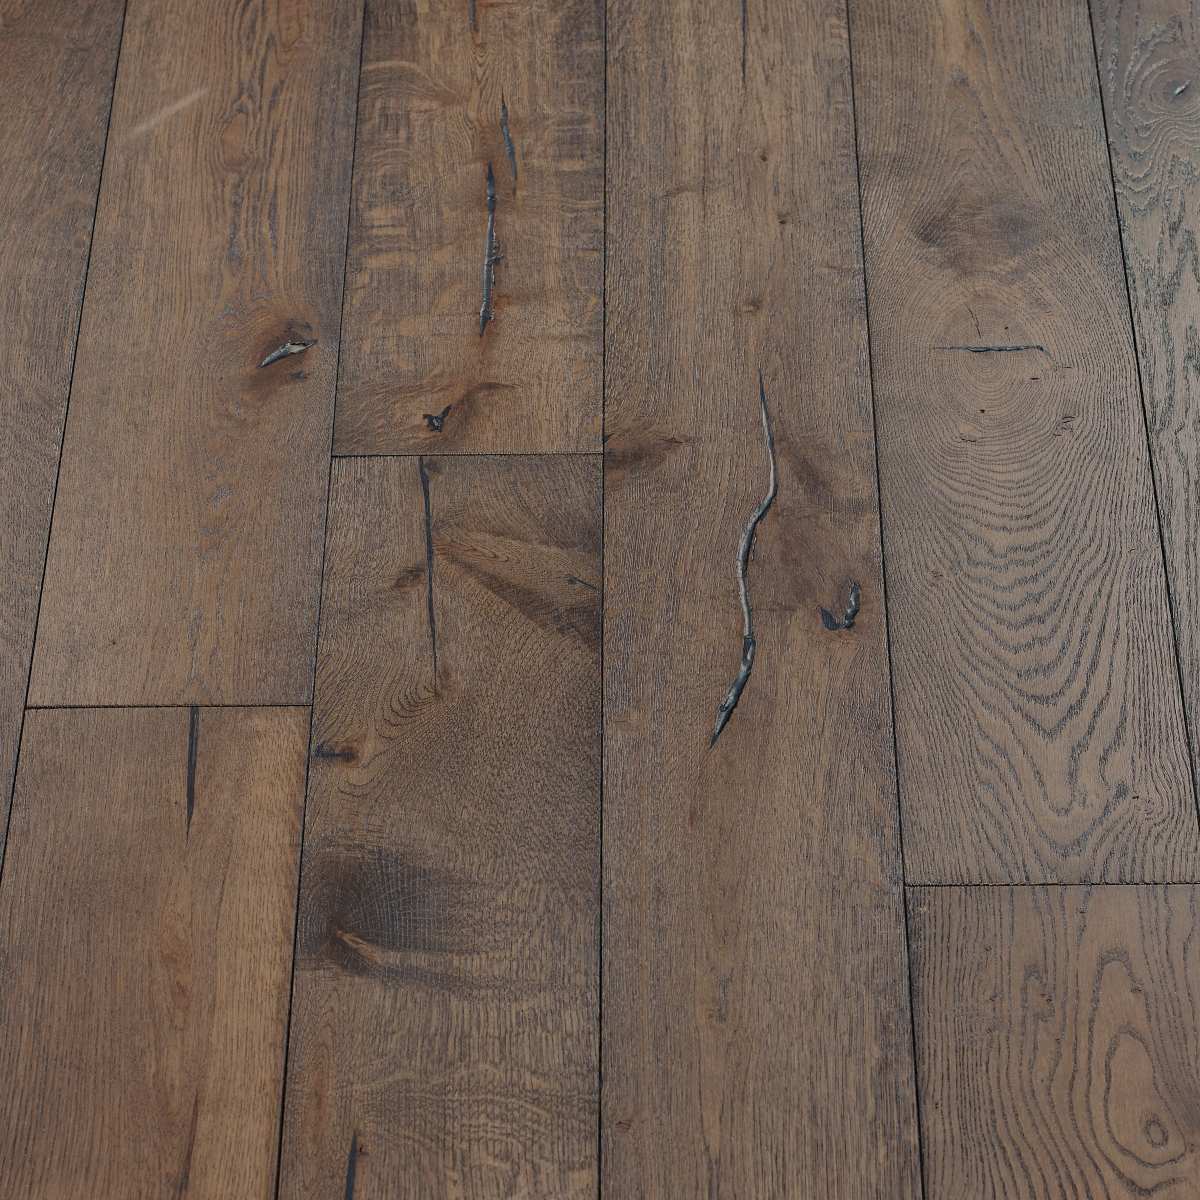 Distressed Nordic Woodflooring - image displaying distressed nordic-colored wood flooring with cool and muted tones, creating a modern and Scandinavian-inspired aesthetic.